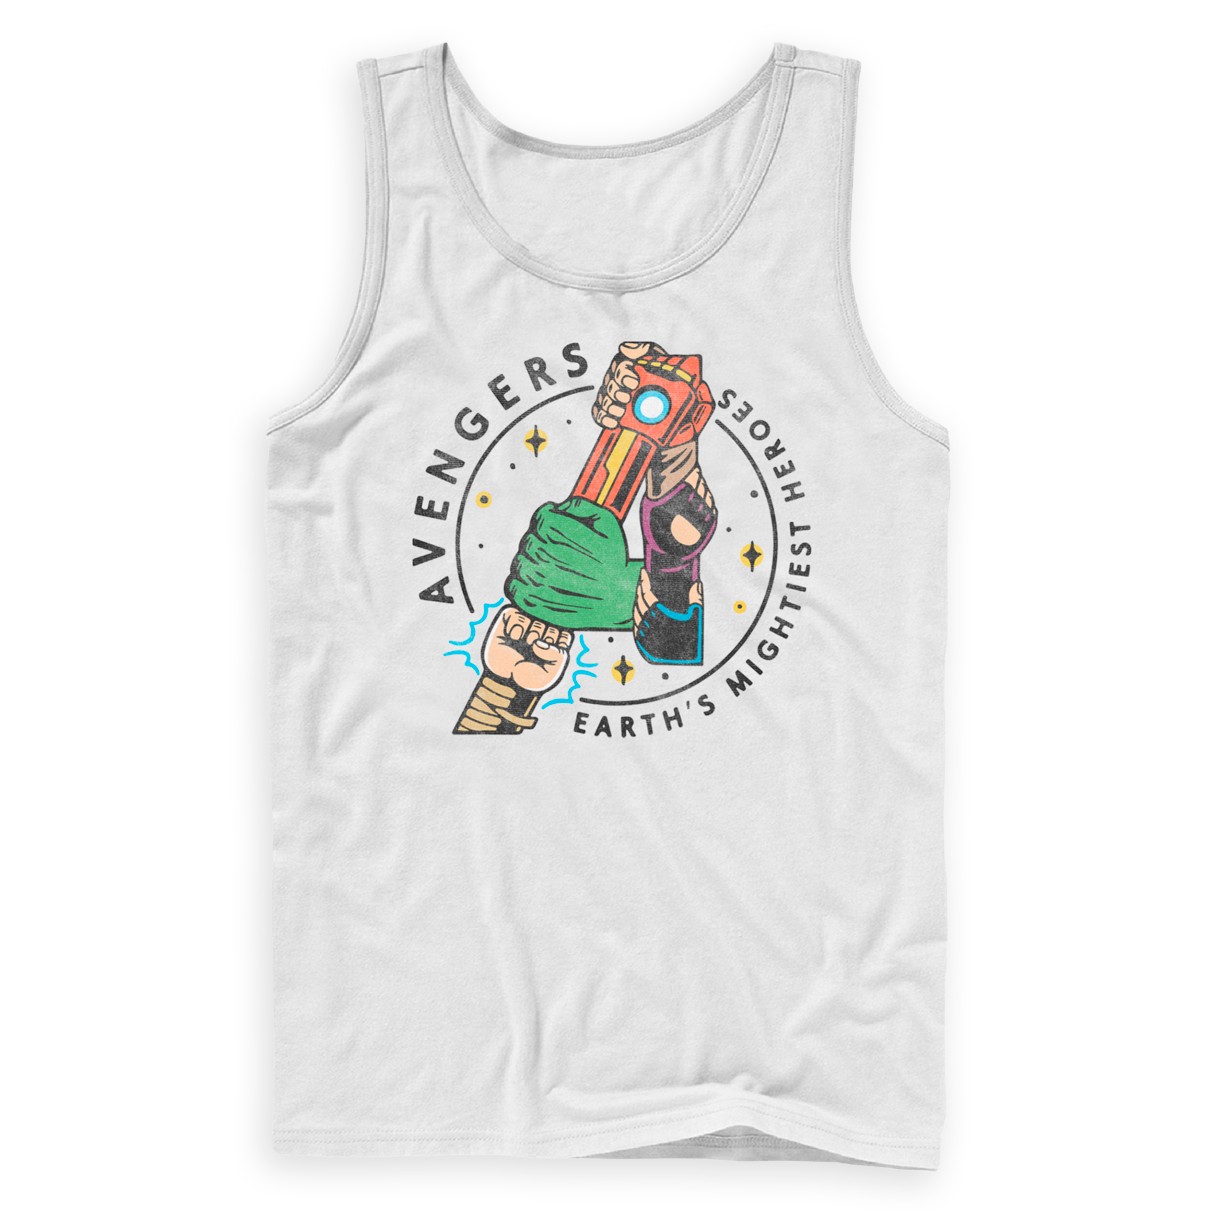 The Avengers Team Huddle Tank Top for Adults